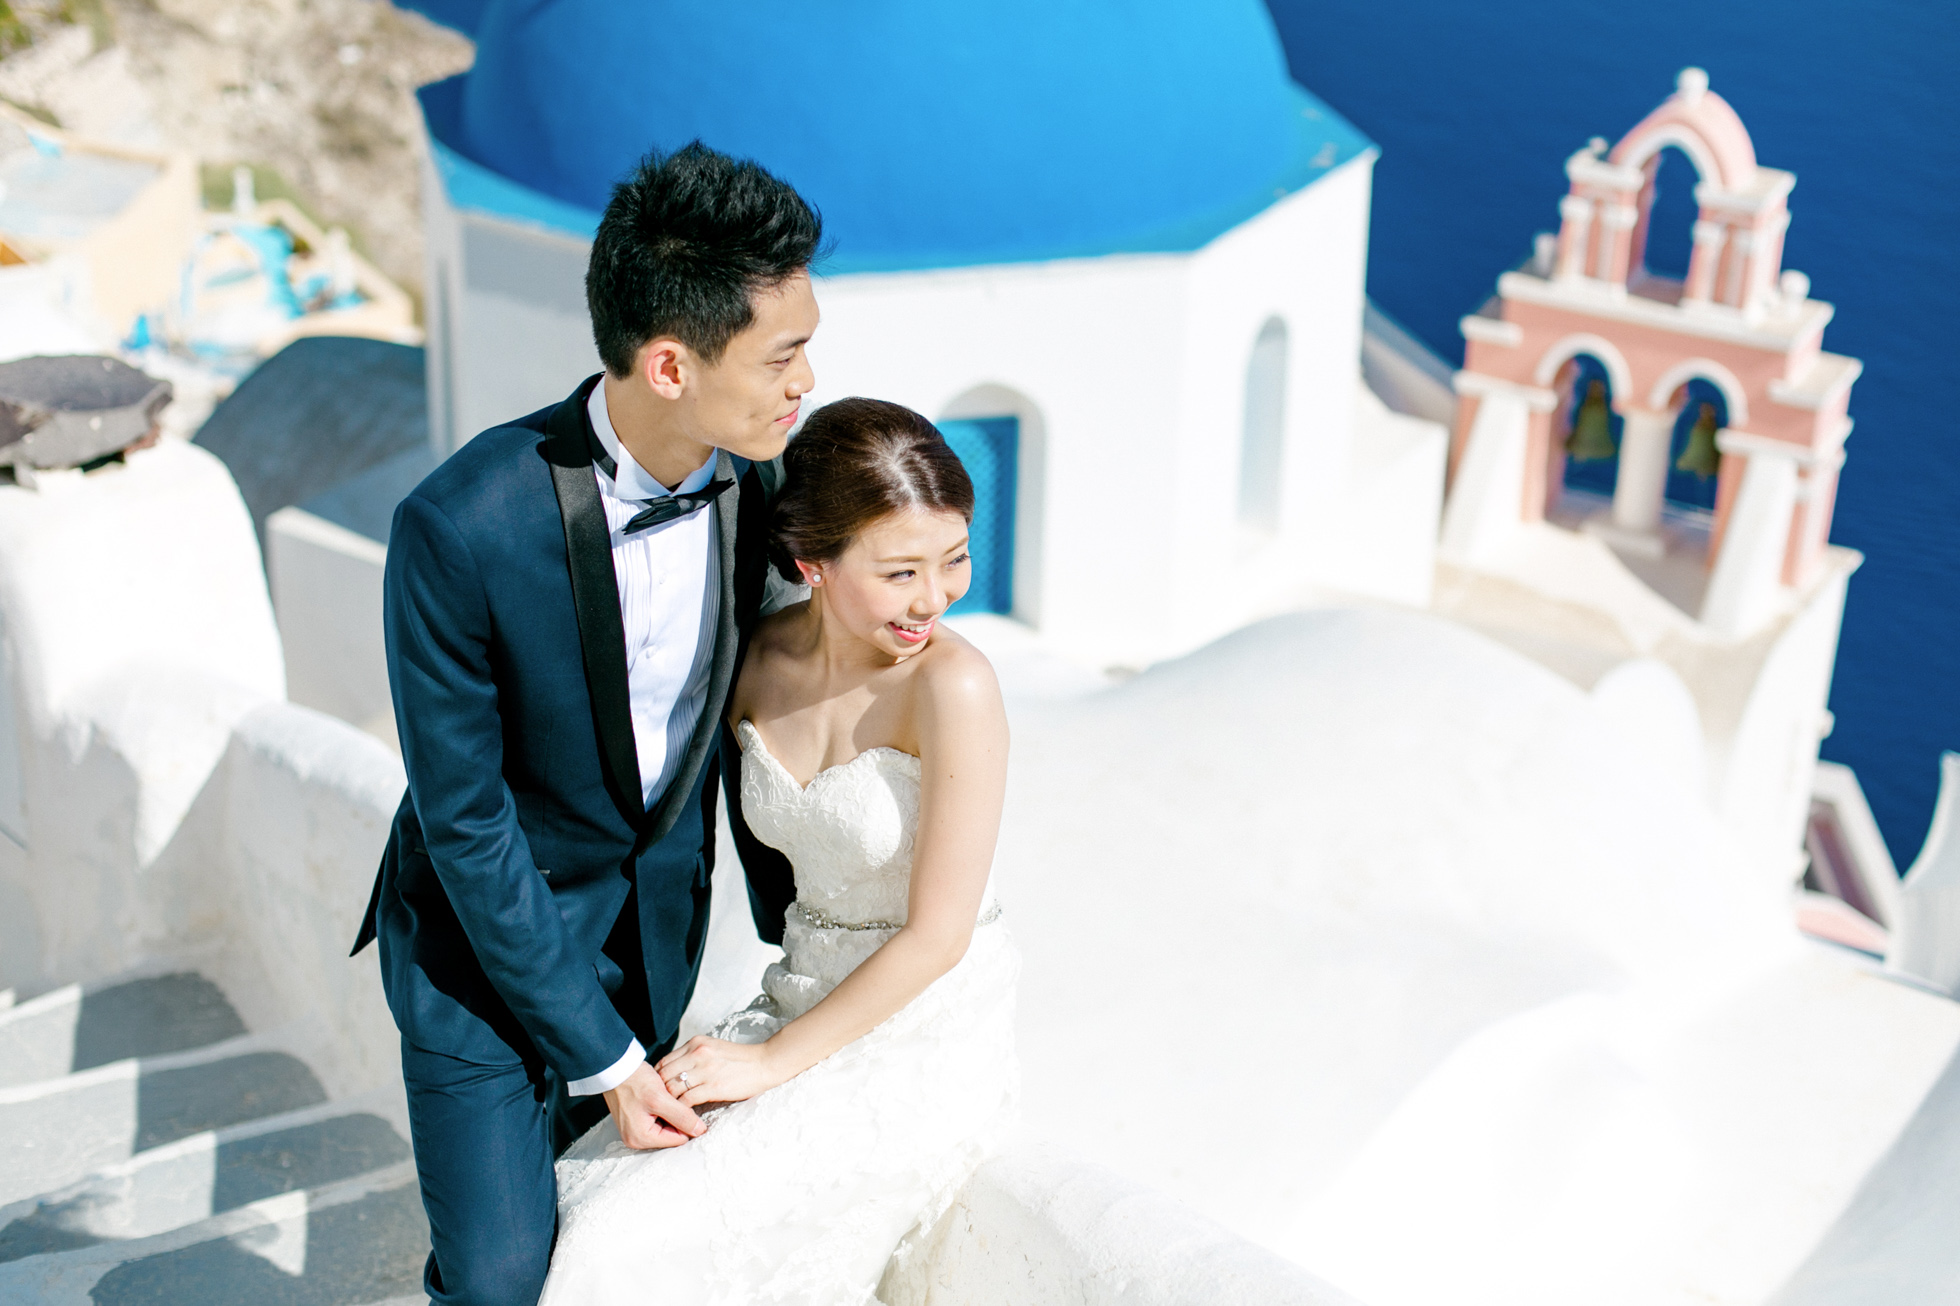 Professional Santorini wedding day photoshoot, groom and bride are posing with the picturesque background of Oia, seaview and clear blue skies.